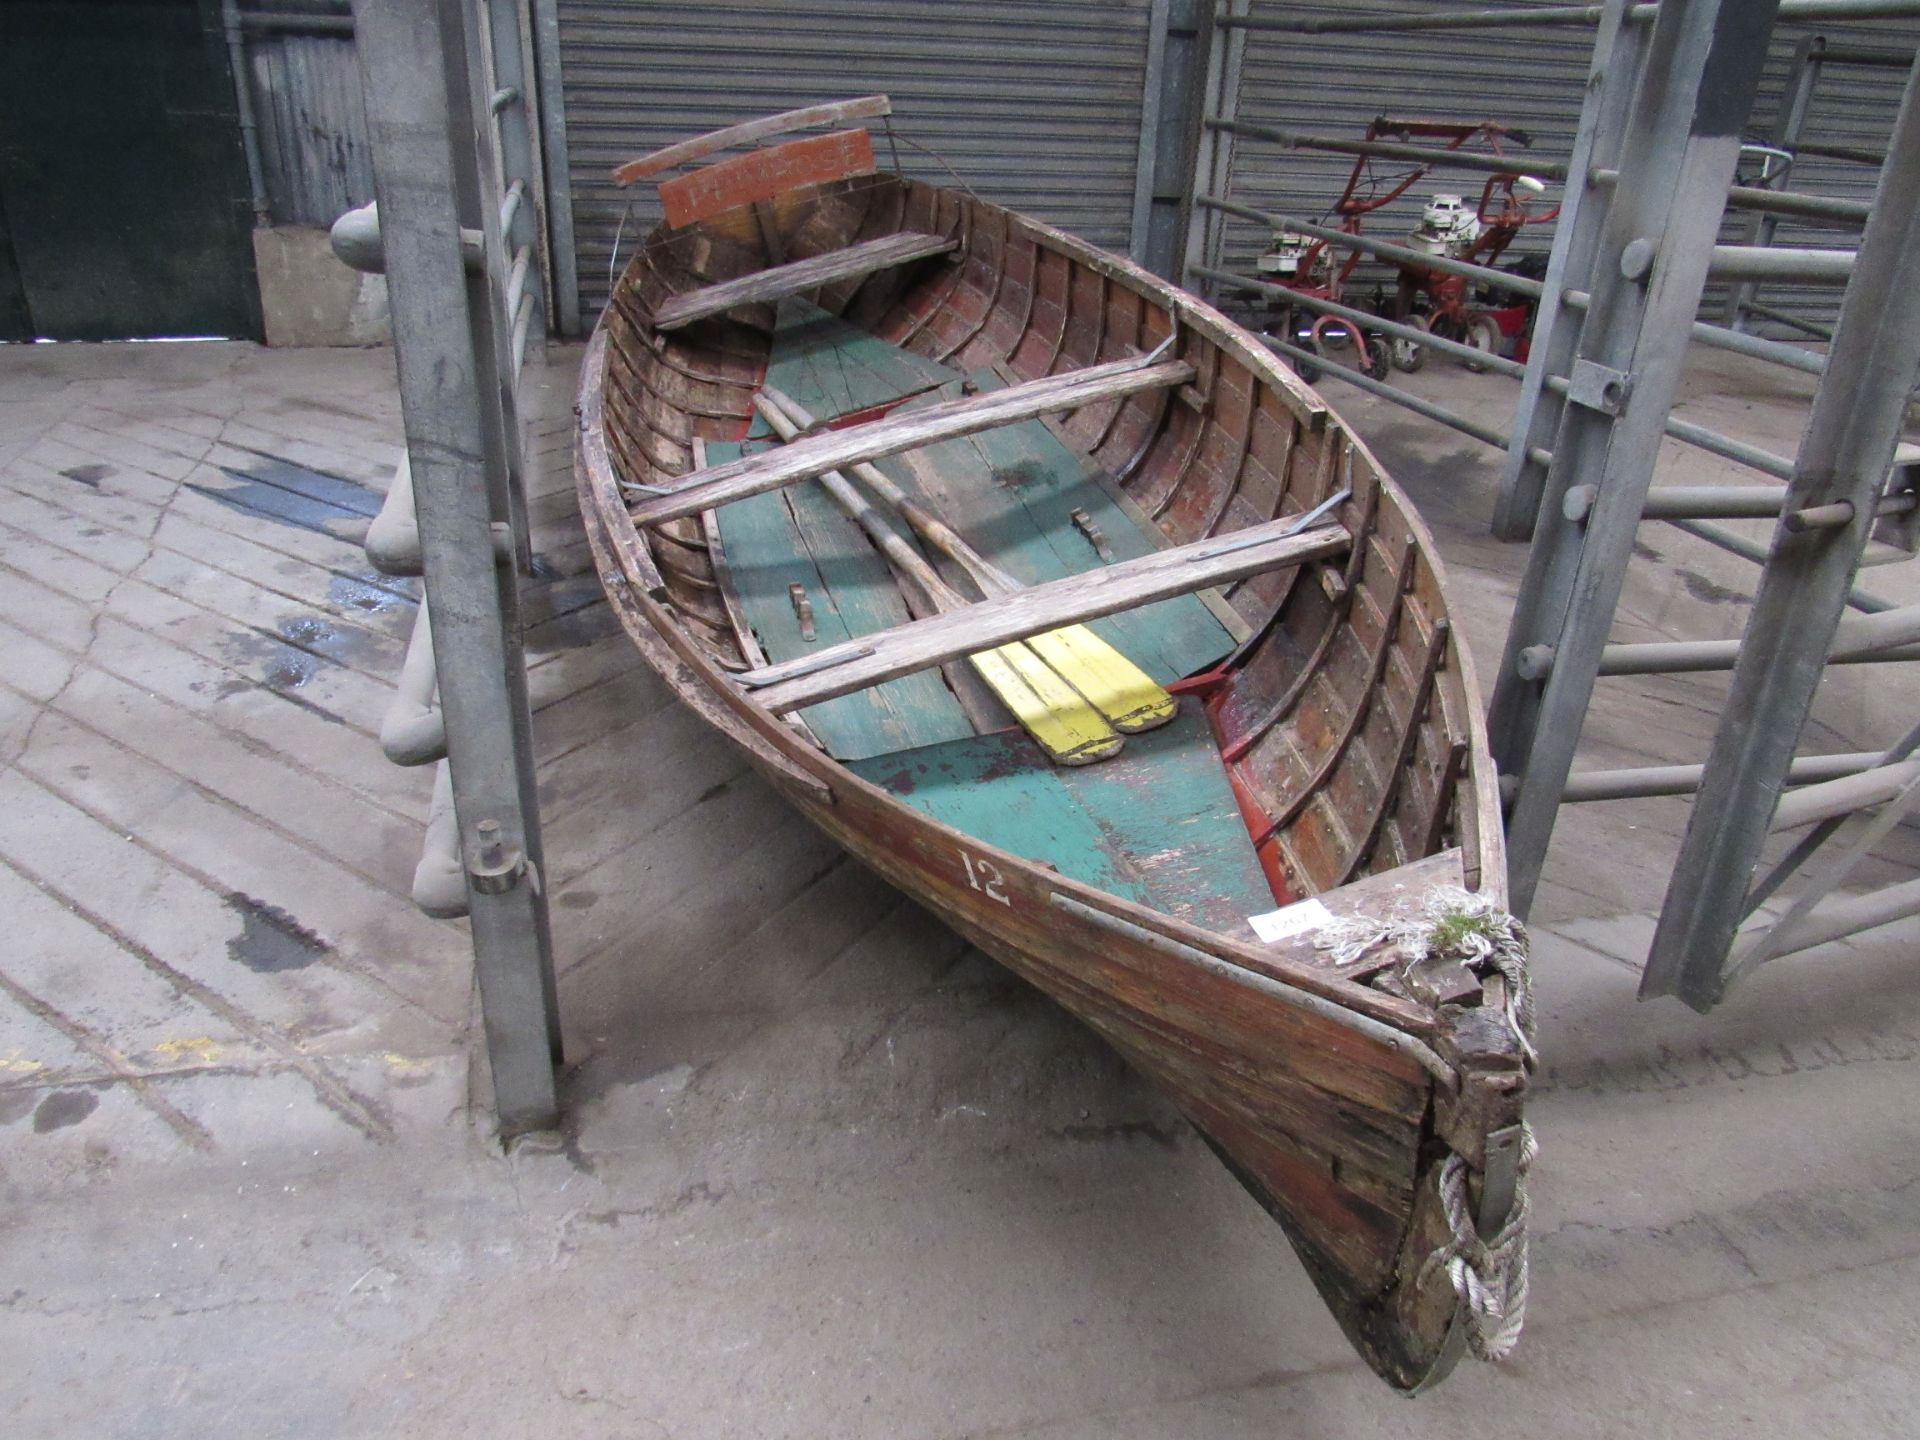 Approximately 16 foot Clinker built Edwardian Boating Lake Rowing Boat with high back seat. Complete